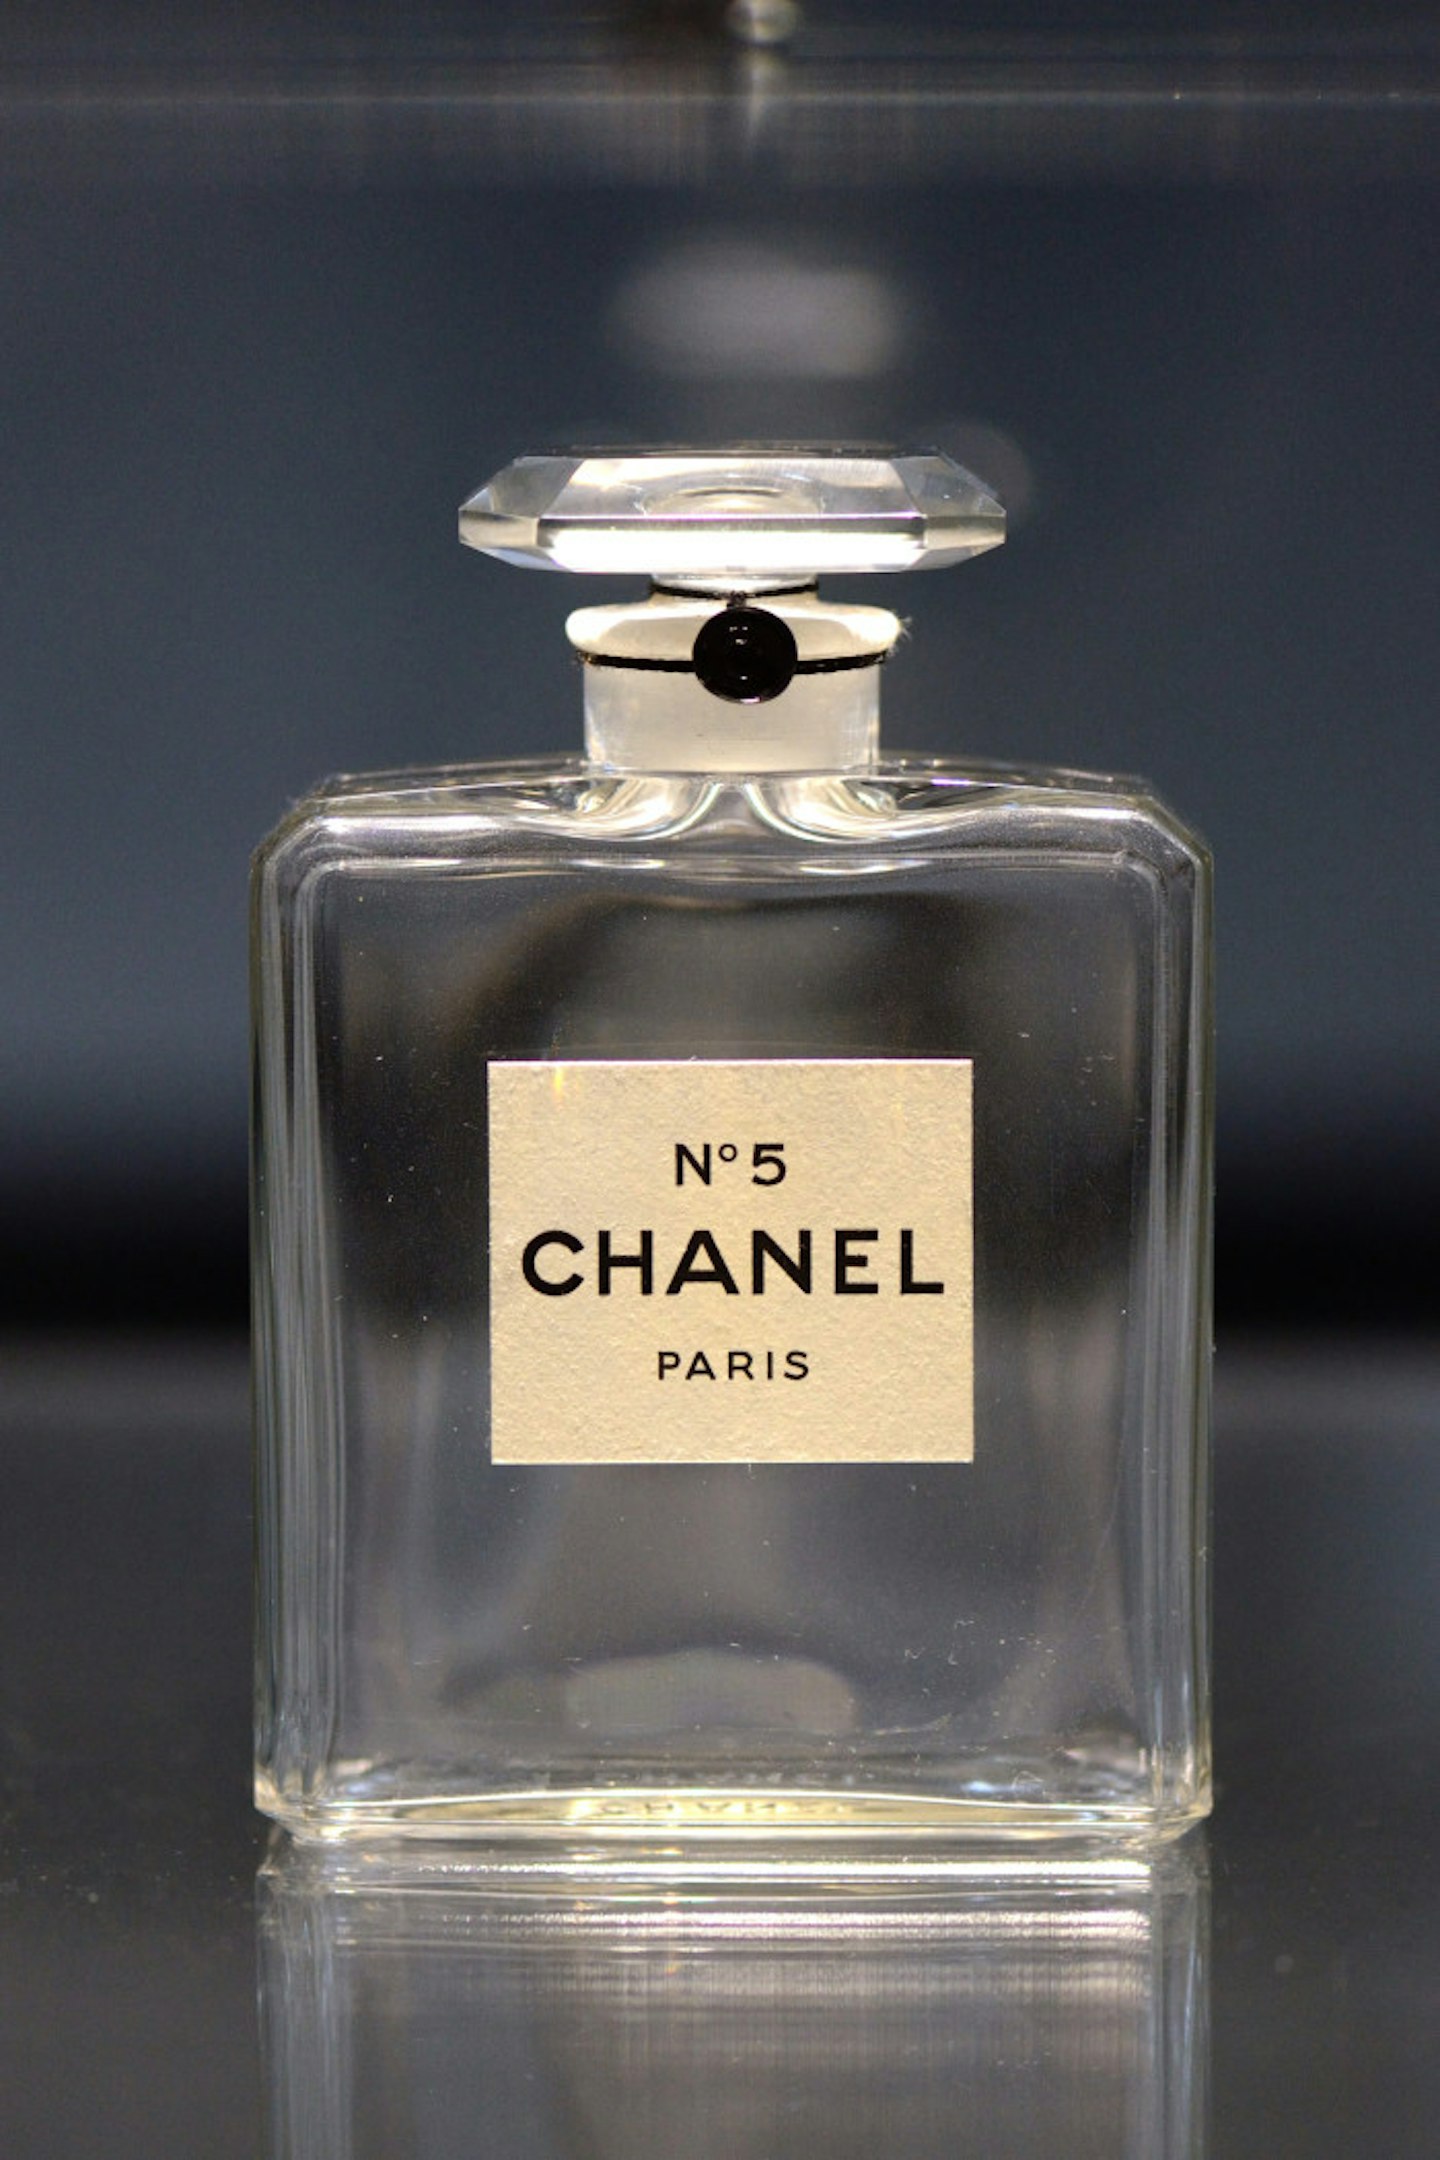 The iconic Chanel No. 5 Scent Bottle [Getty]